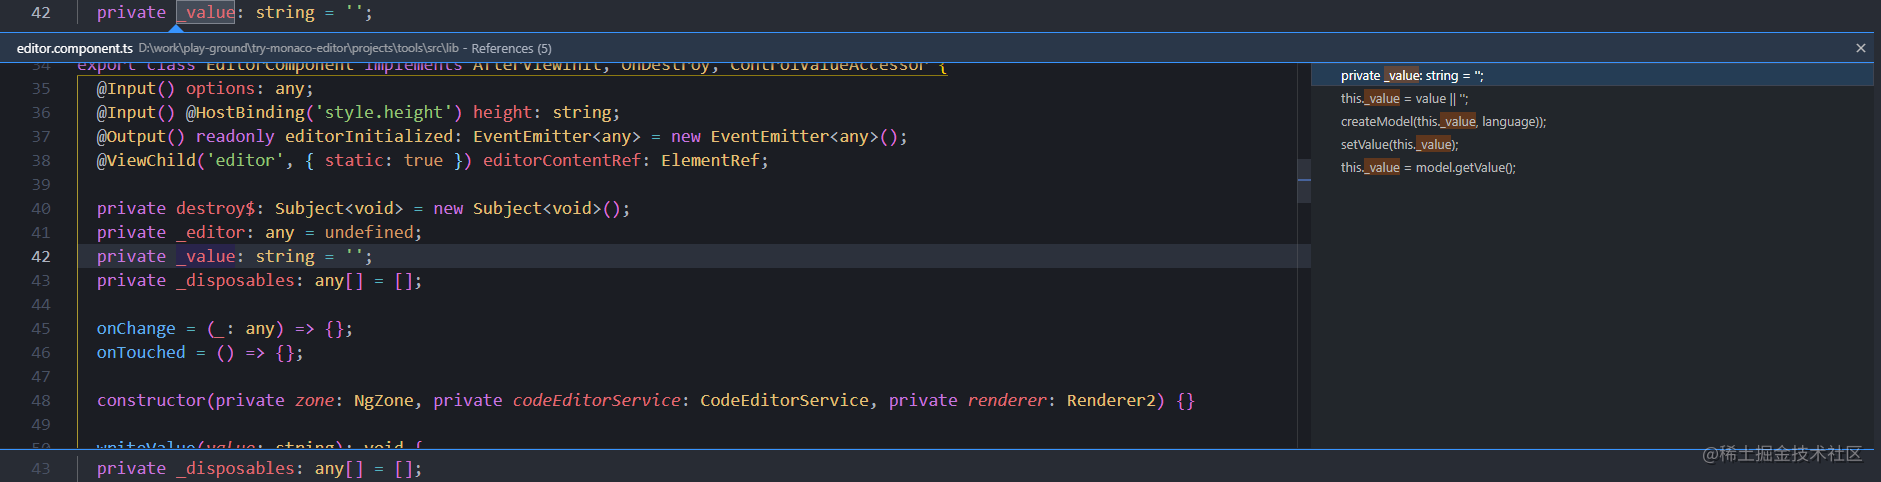 vscode-reference.png